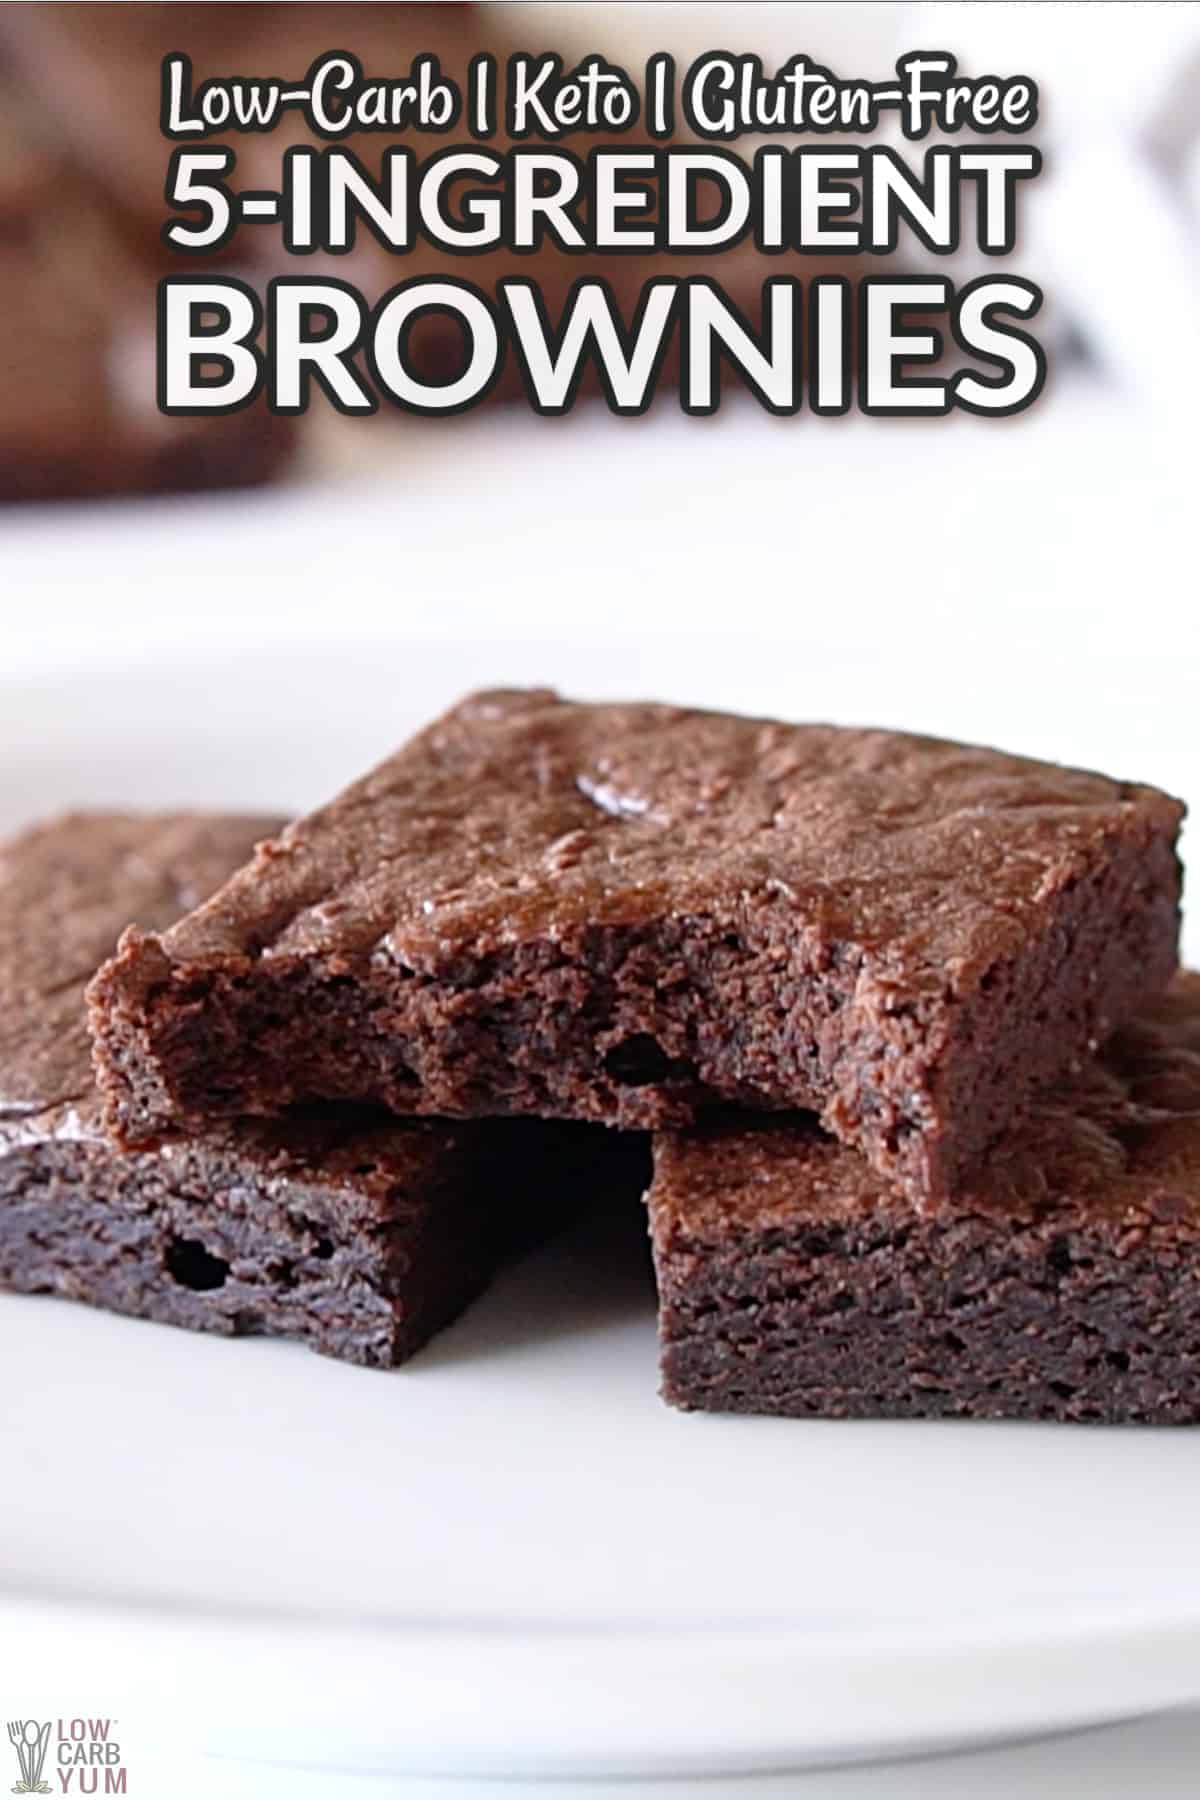 5 ingredient keto brownies with text overlay.